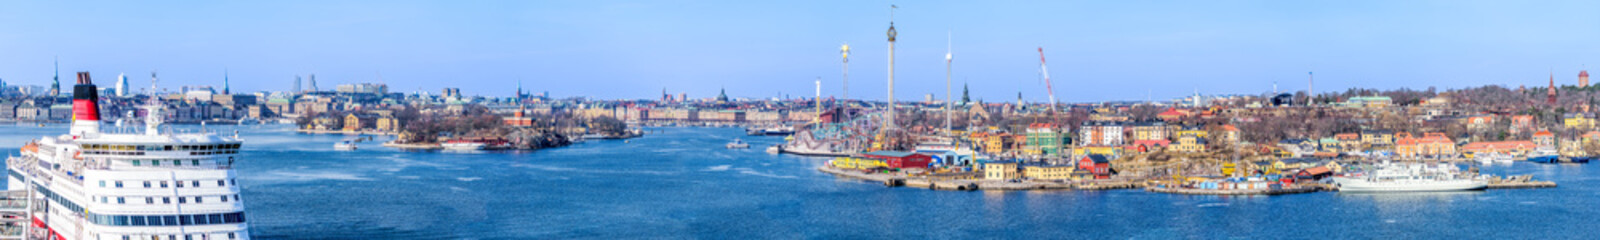 Panoramic view of stockholm city